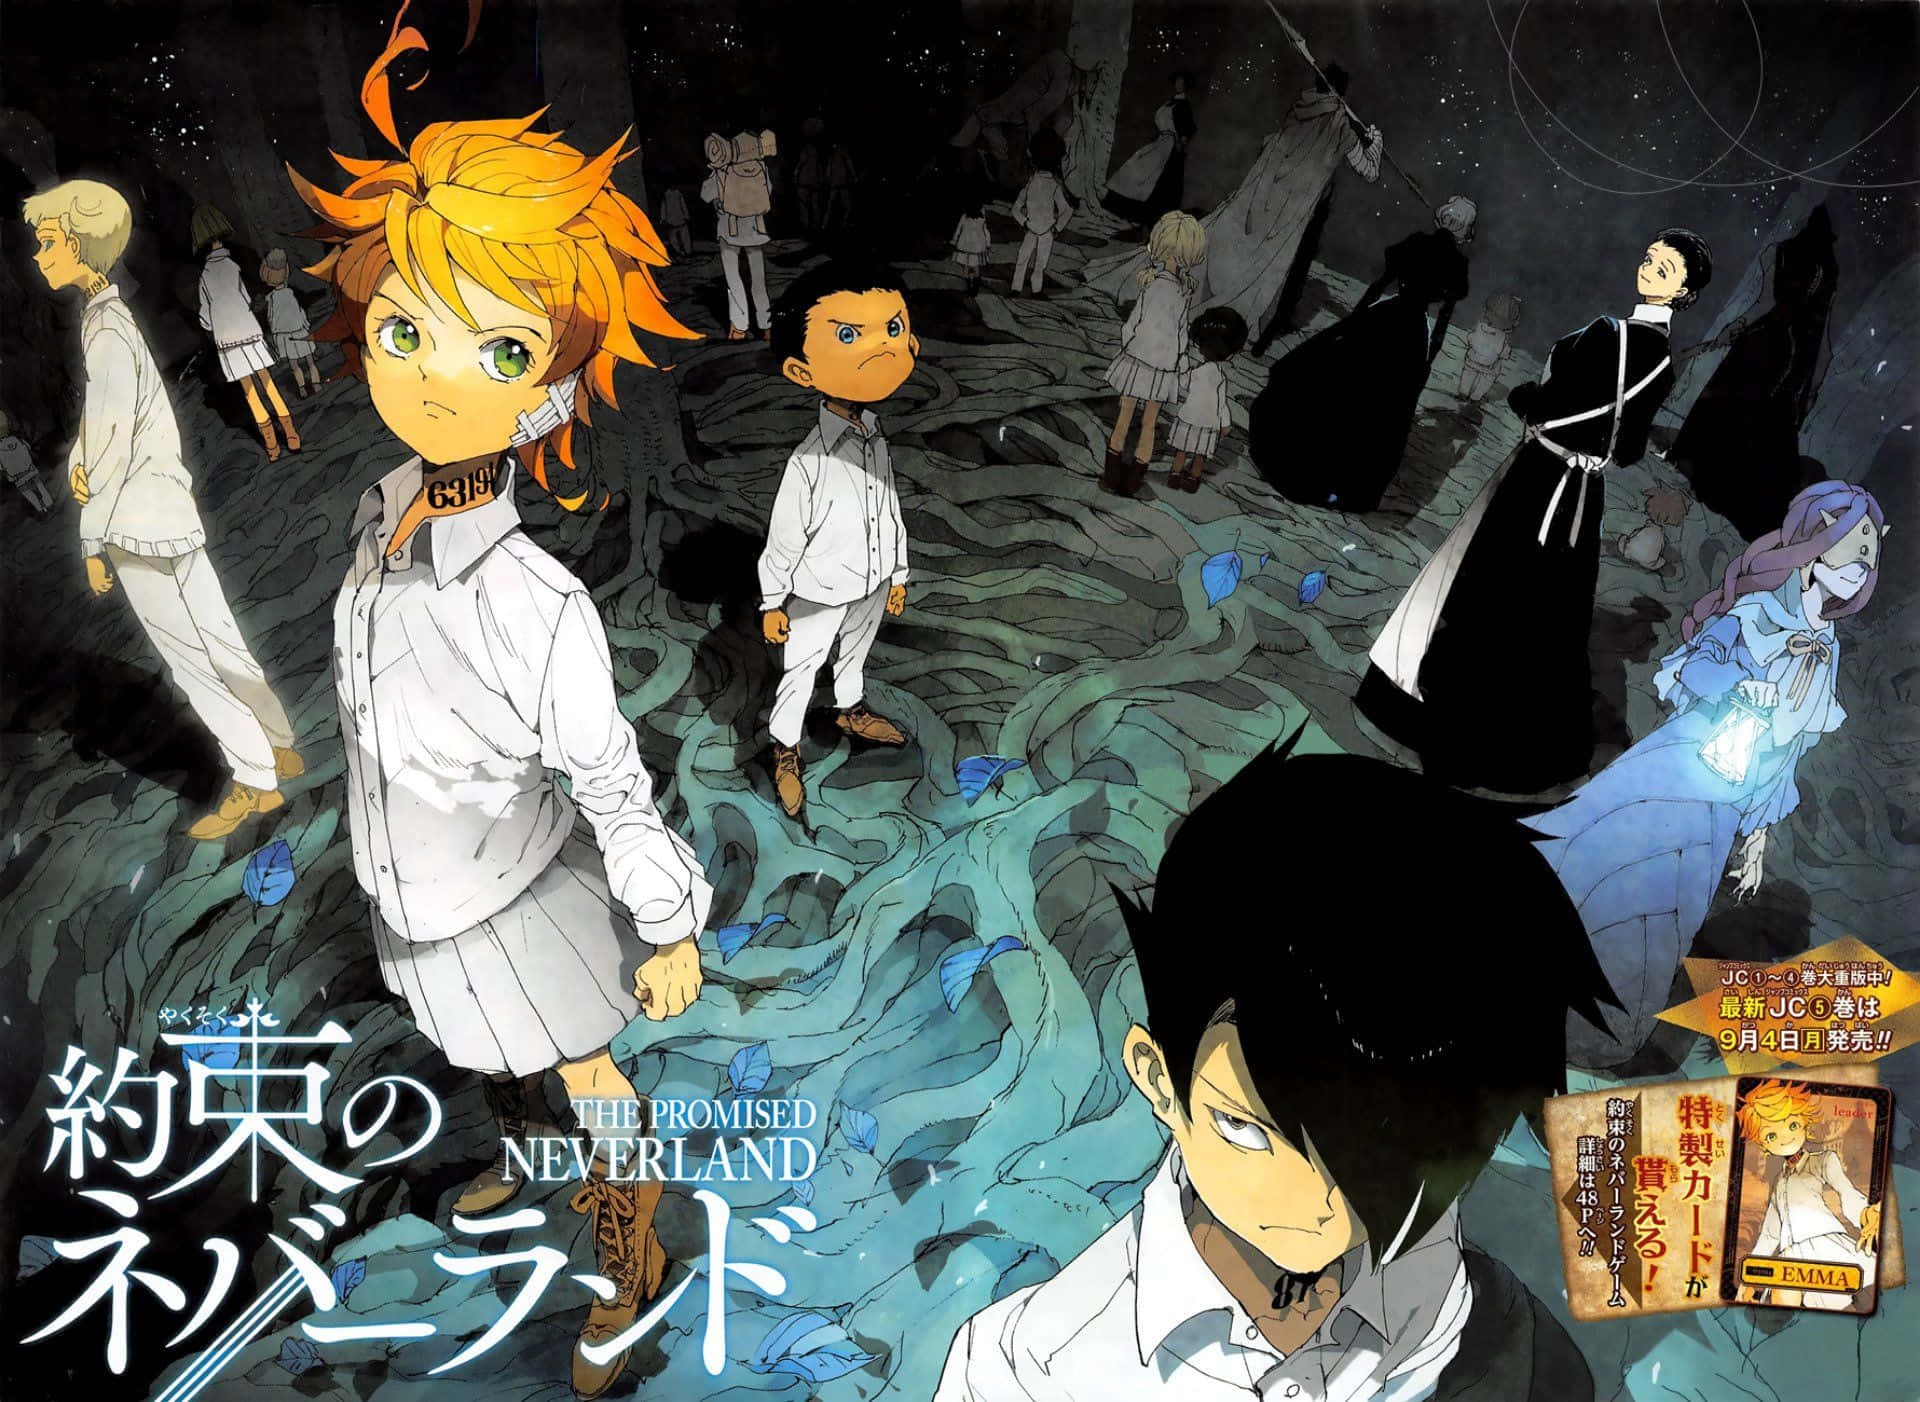 Captivating The Promised Neverland background featuring the main characters